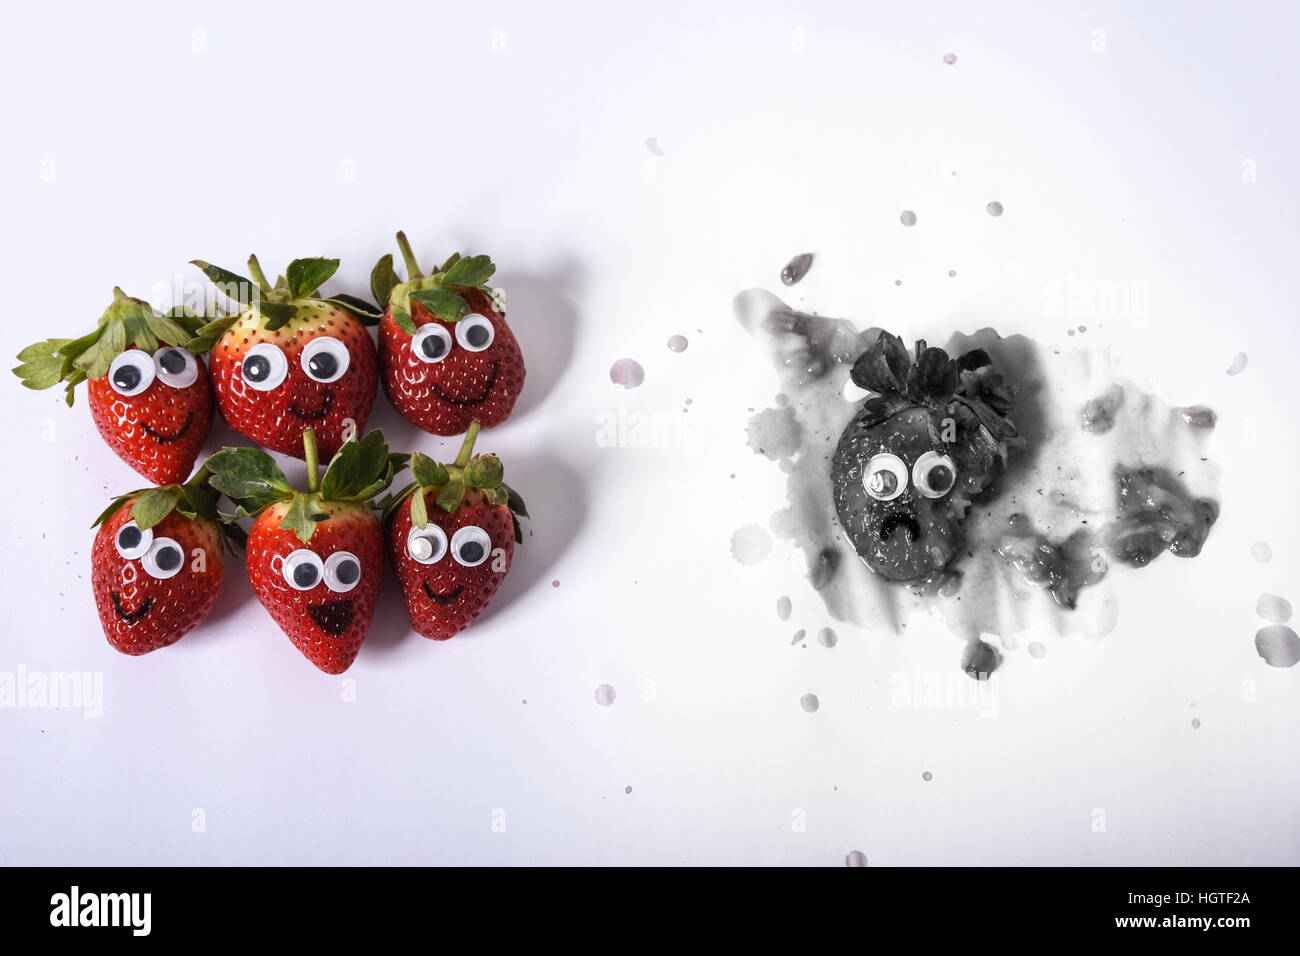 Strawberries with facial expressions showing that food shouldn't be wasted Stock Photo